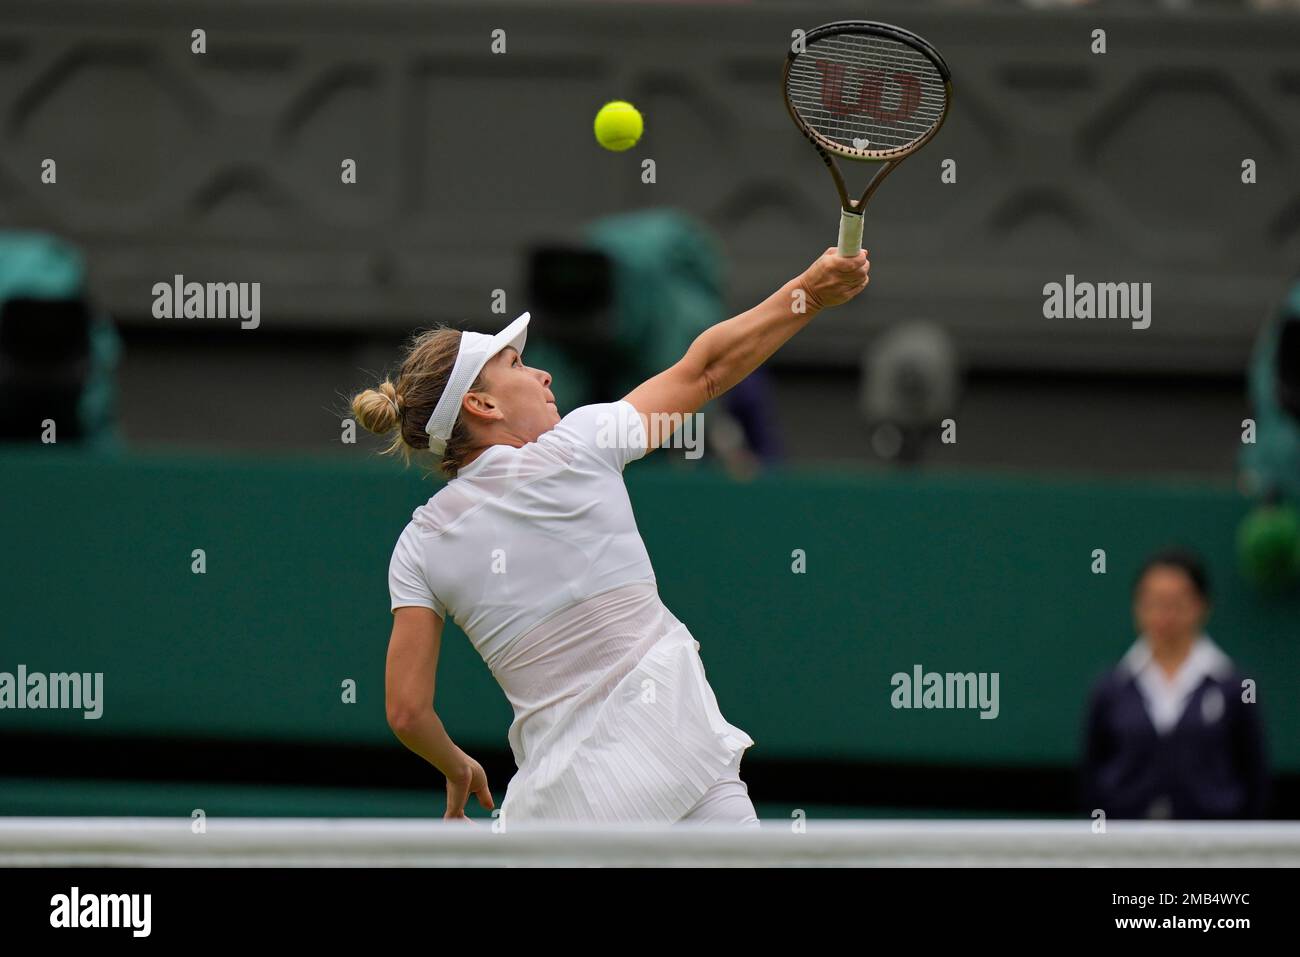 Romania's Simona Halep plays a backhand smash return to Amanda Anisimova of  the US in a women's singles quarterfinal match on day ten of the Wimbledon  tennis championships in London, Wednesday, July